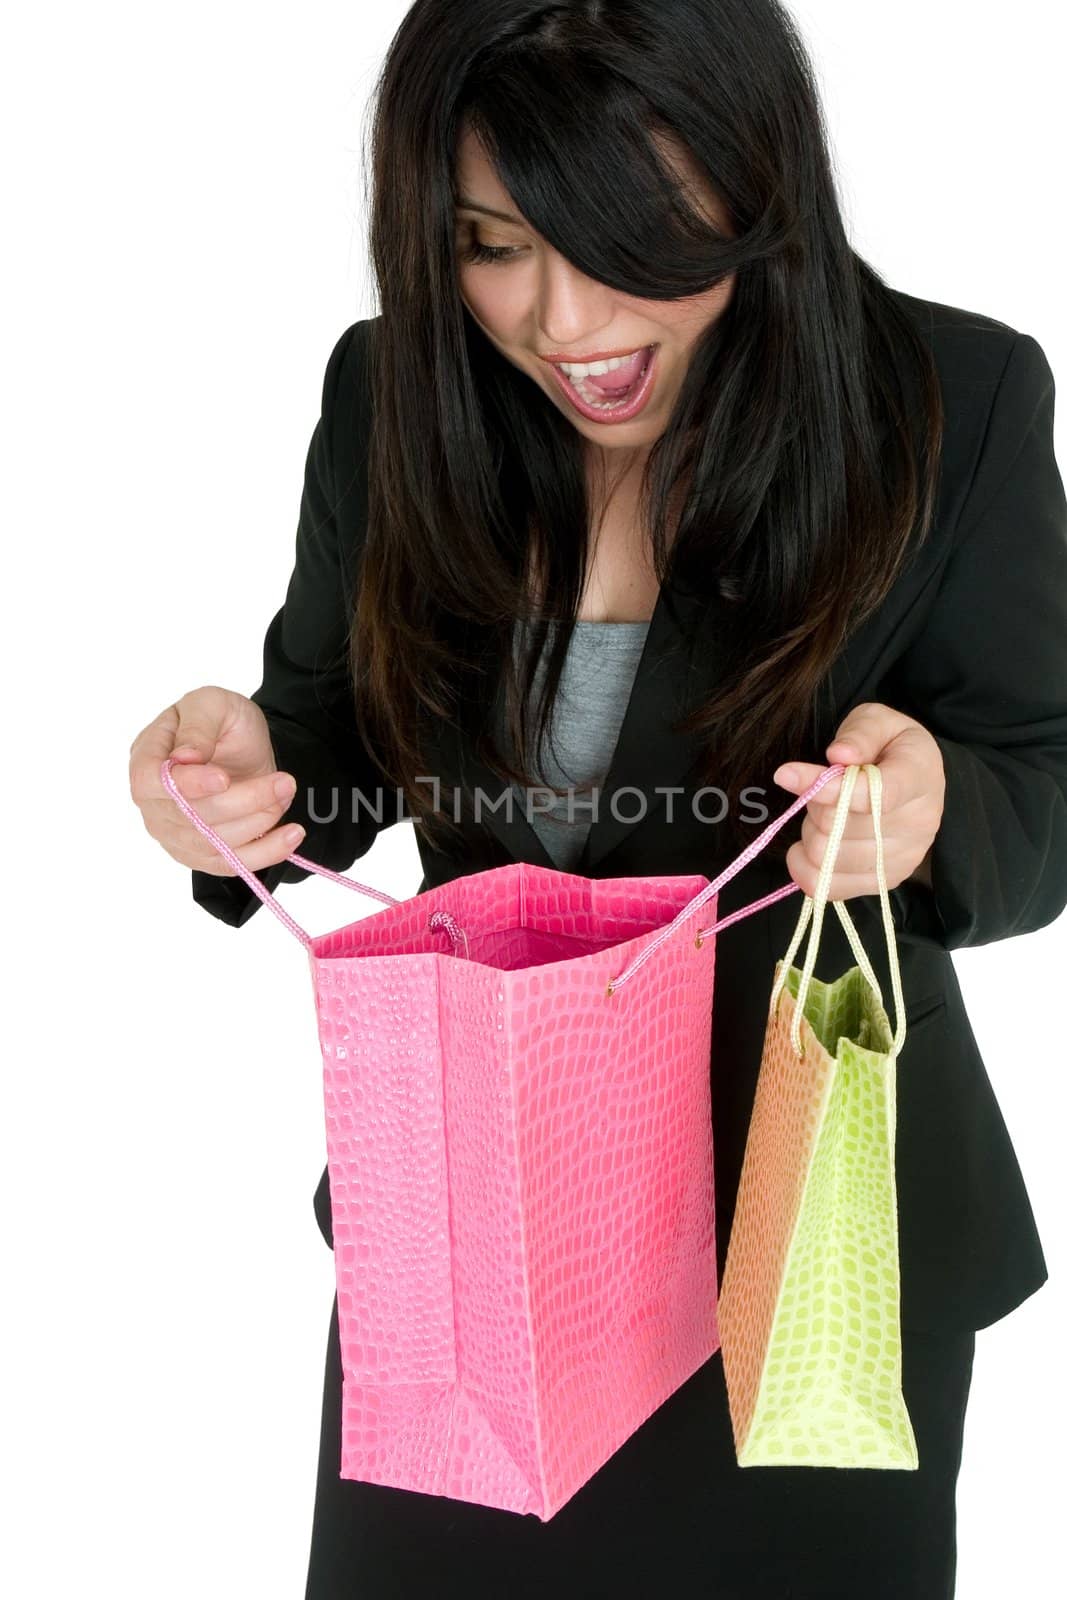 A delighted woman looking into some colourful gift bags